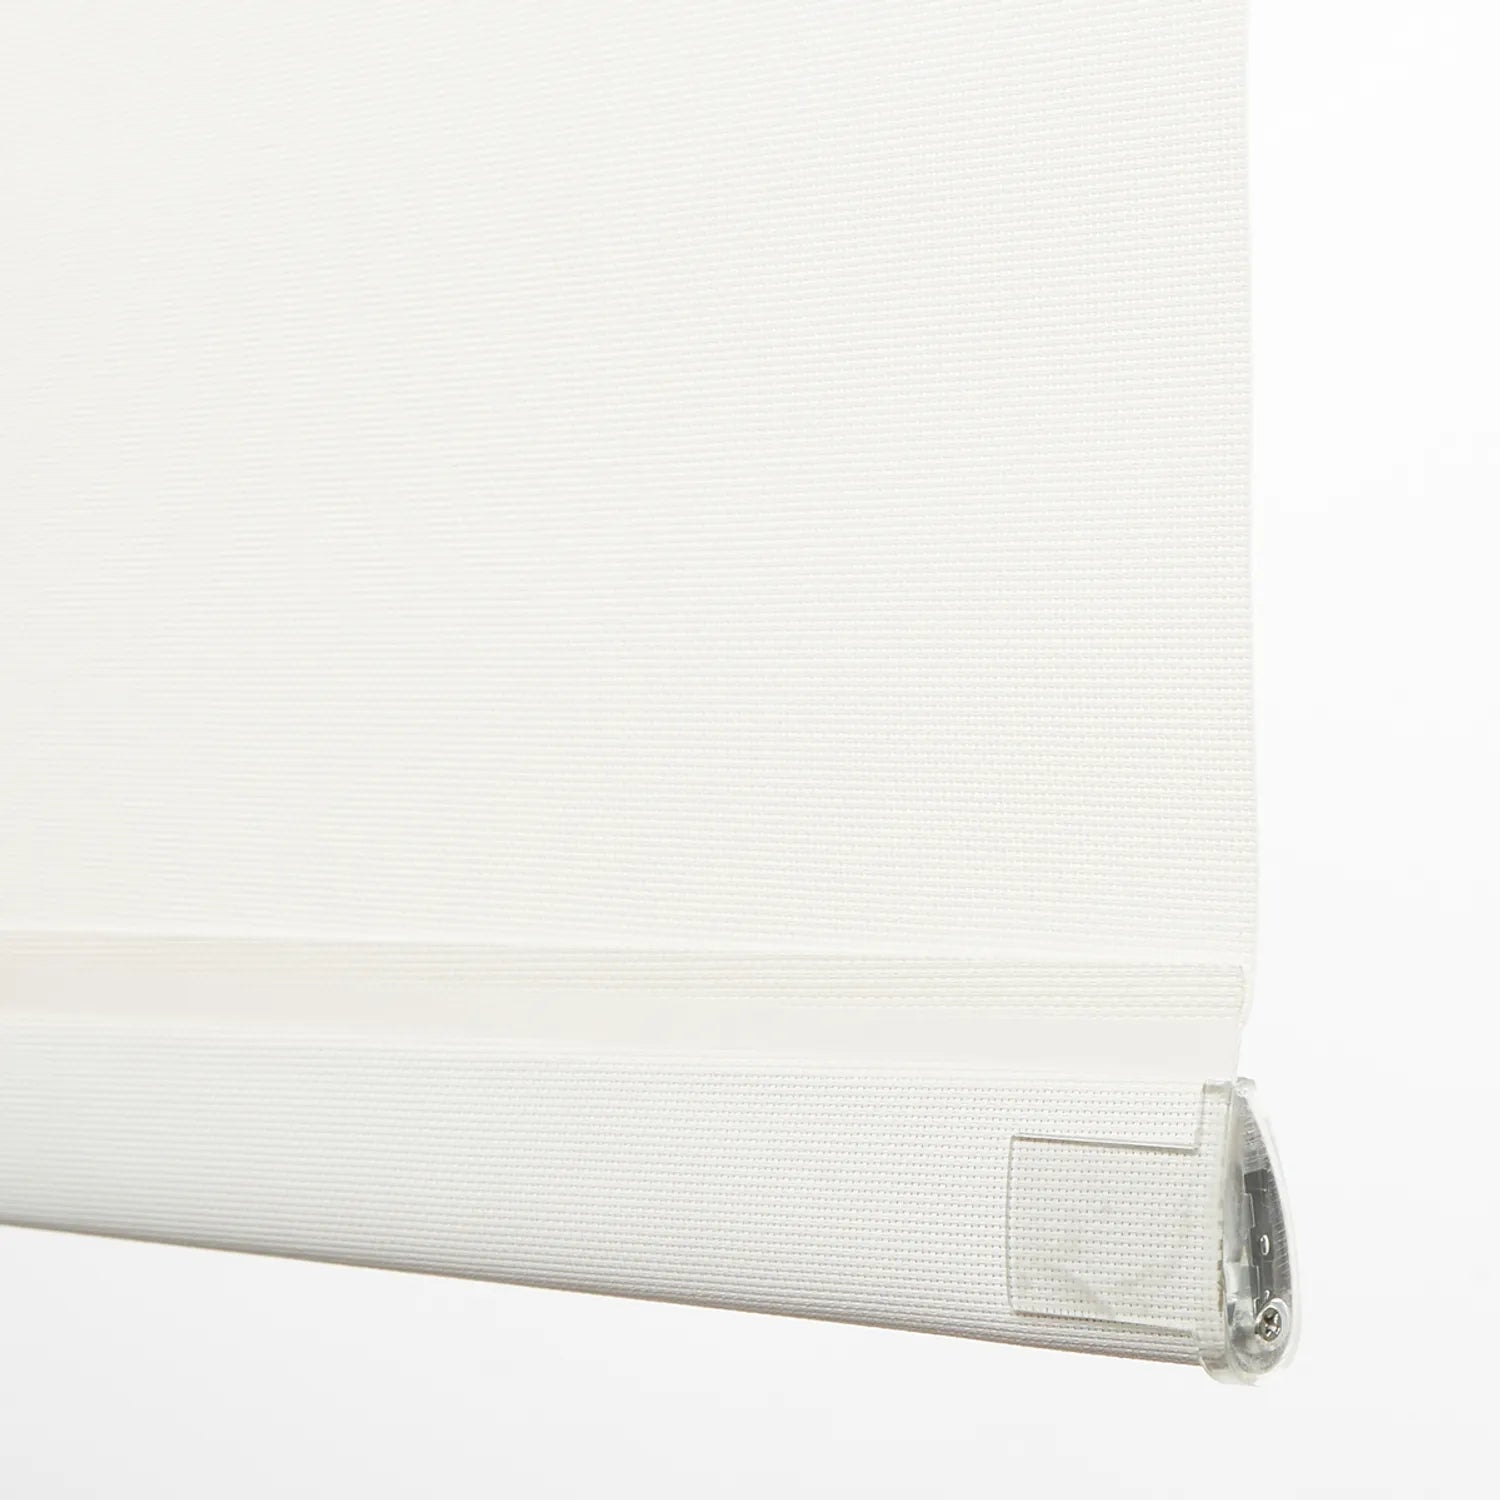 Close-up of EaseEase UV Blocker Roller Blind in white, featuring textured fabric and durable metal bracket